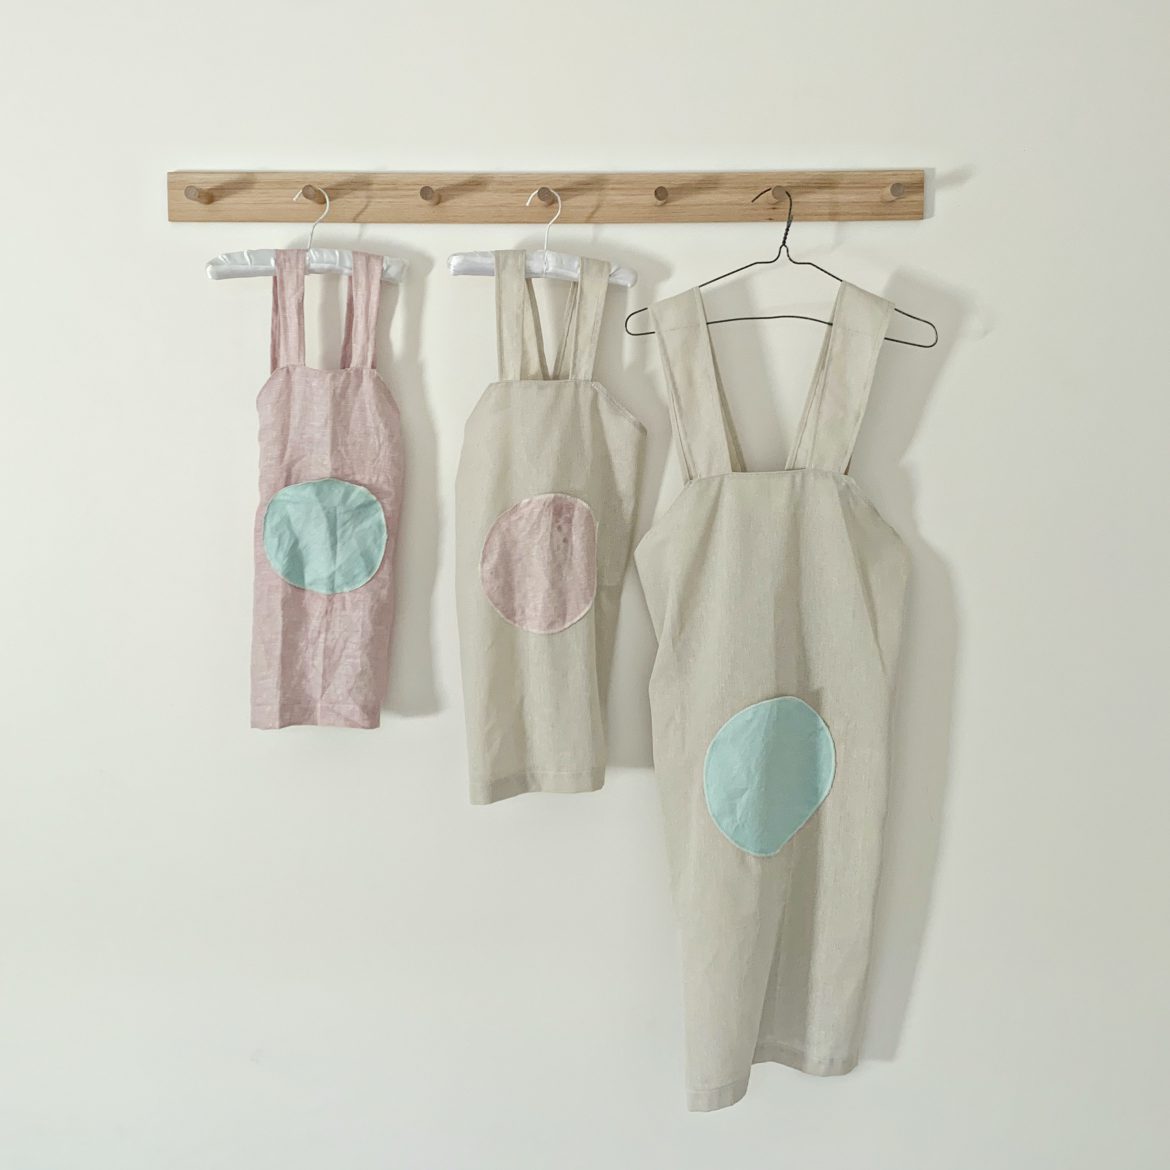 Cross Back Apron Pattern | Japanese Apron Pattern | Linen Apron This apron sewing pattern for adults and kids comes in 6 sizes. It’s perfect in linen, cotton and other mid weight fabrics. Buy the pattern at: https://shop.sewinlove.com.au/products/moon-cross-back-apron-pattern